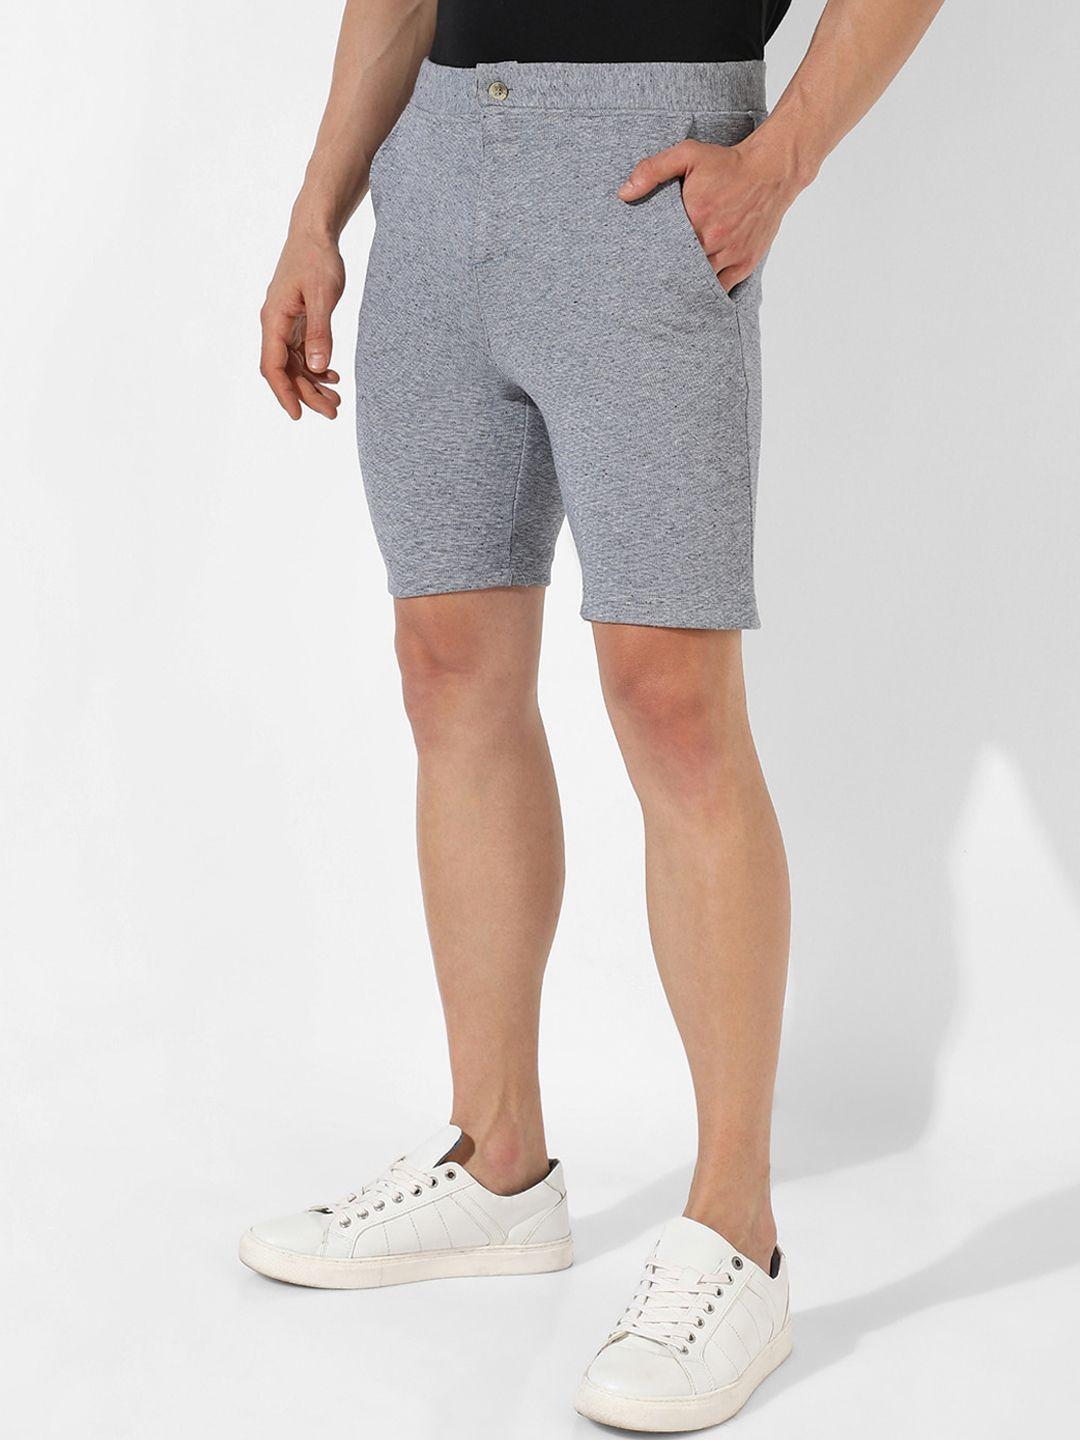 campus-sutra-men-mid-rise-outdoor-shorts